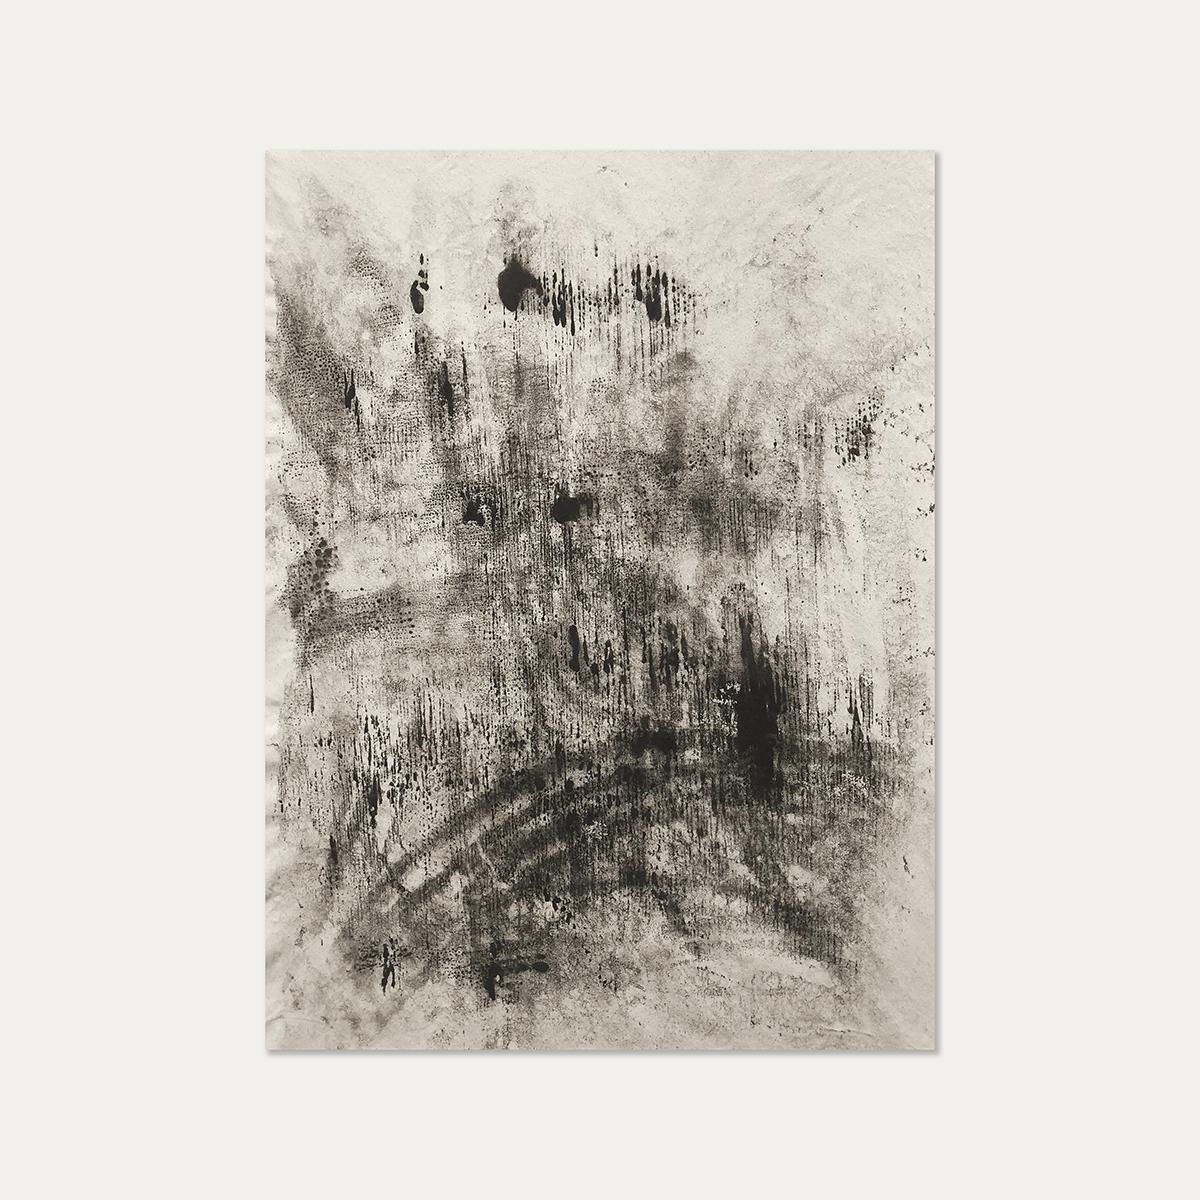 Kurtis Brand Abstract Painting - Ash Ceniza #19, (black and white, ashes, abstract expressionist, charcoal)